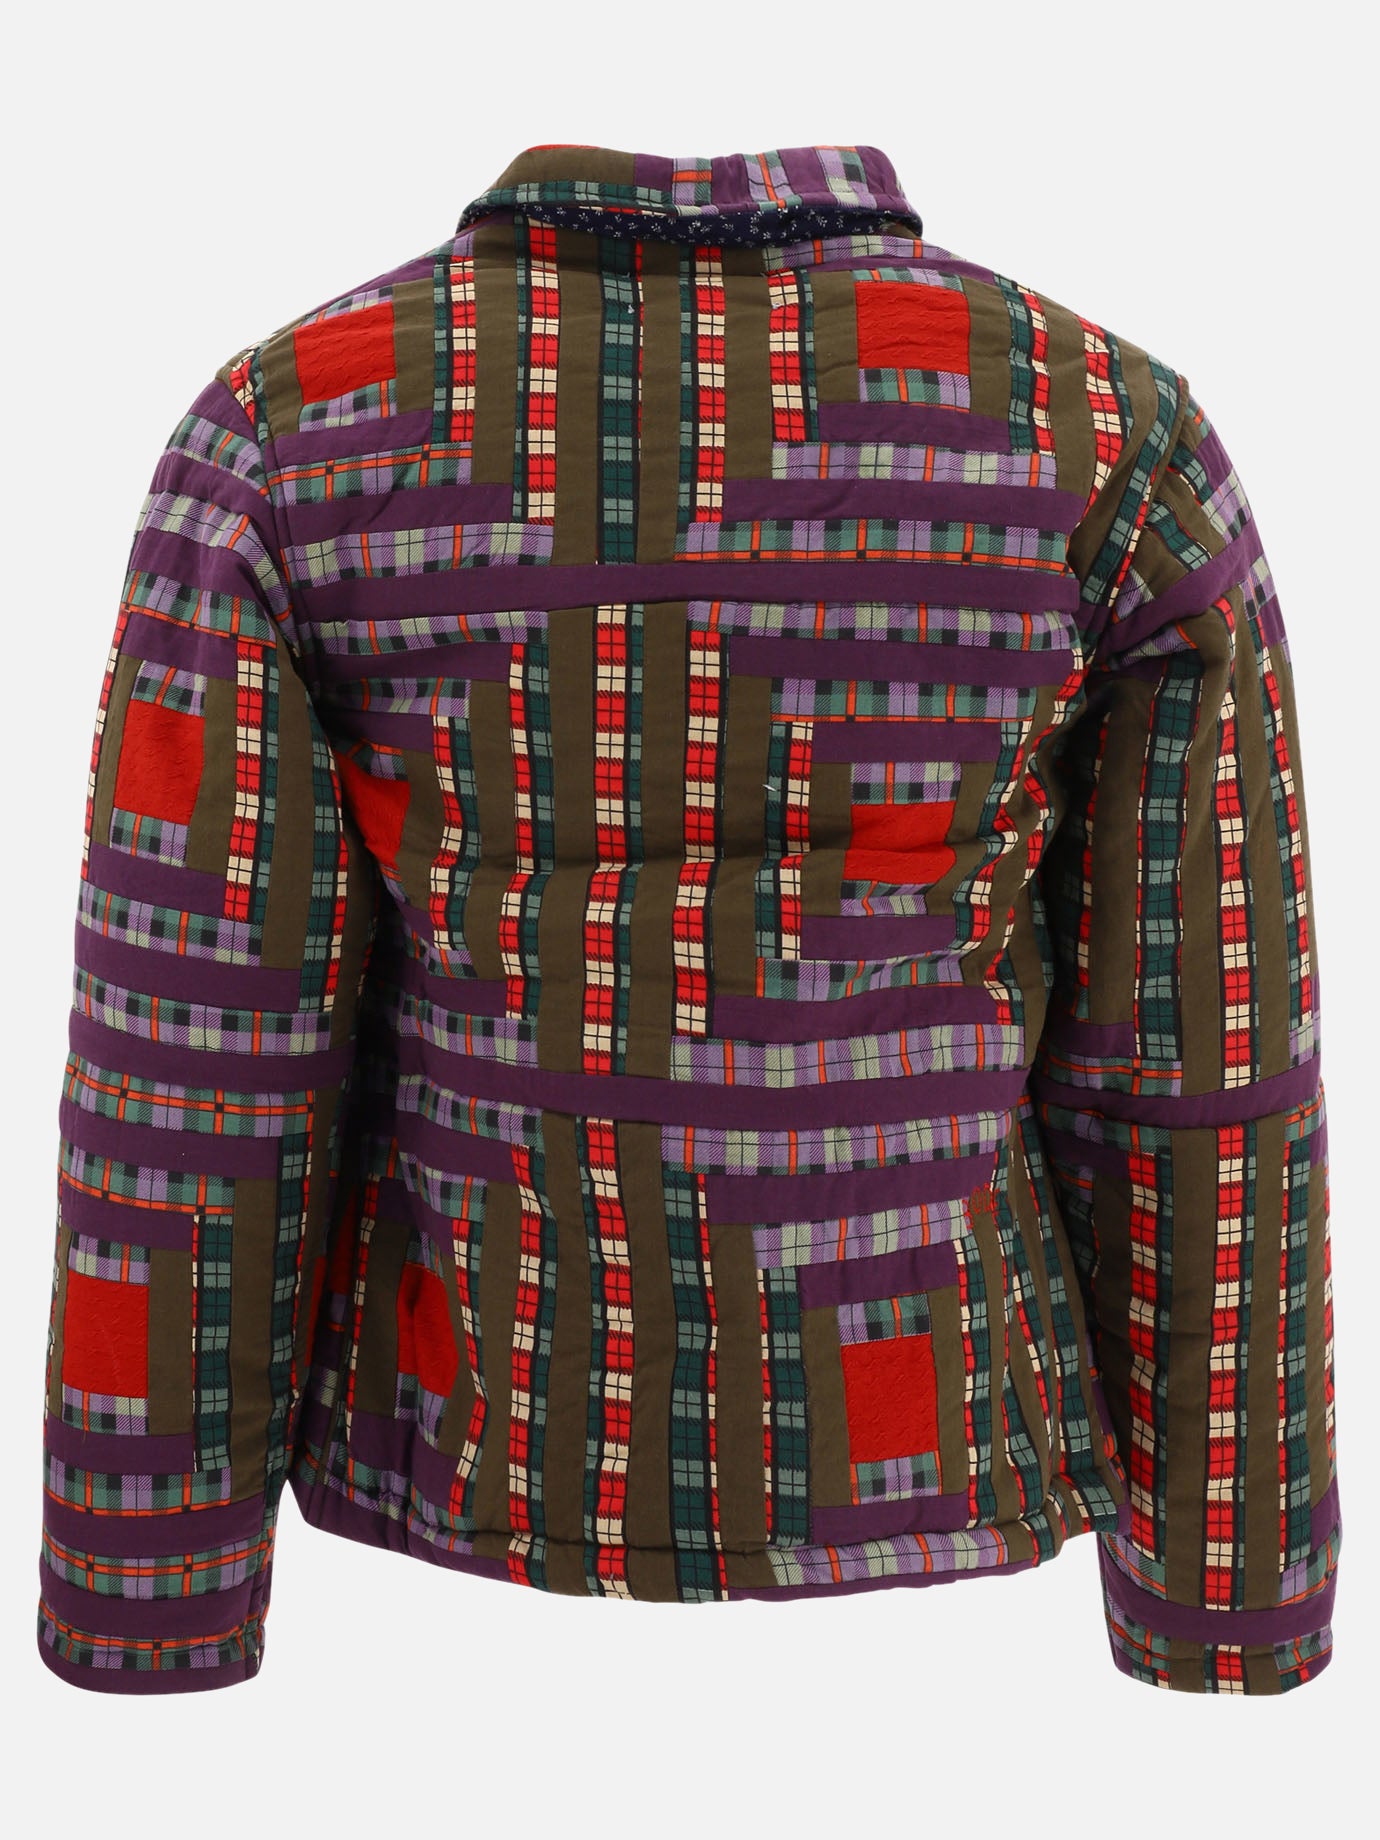 "Plaid Log Cabin" quilted jacket